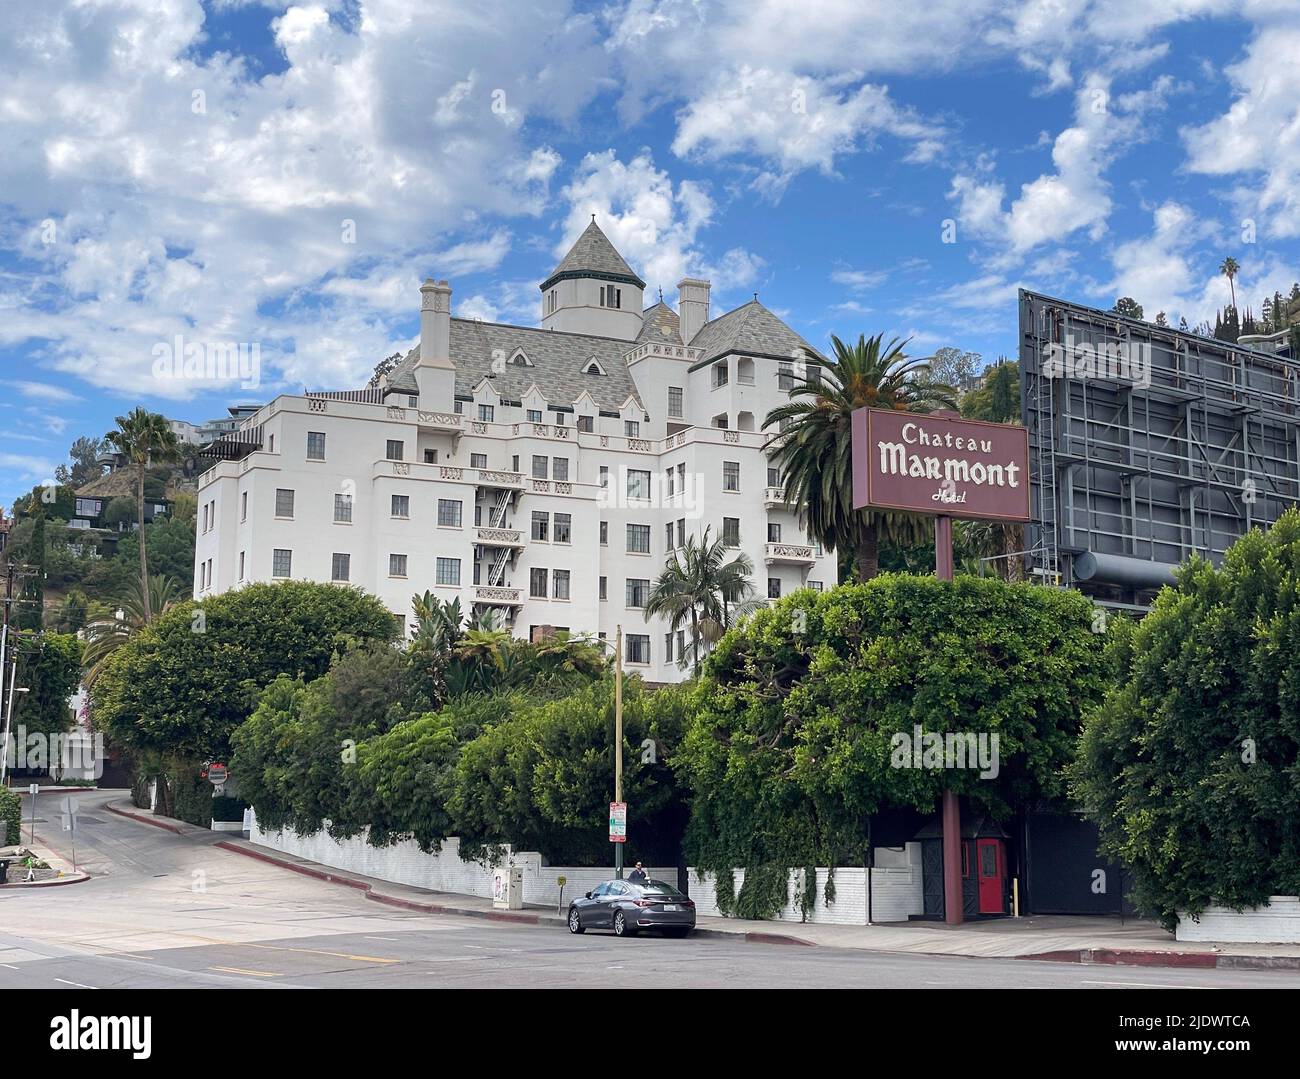 Chateau Marmont, hotel, Sunset Strip, West Hollywood, Los Angeles Stock Photo